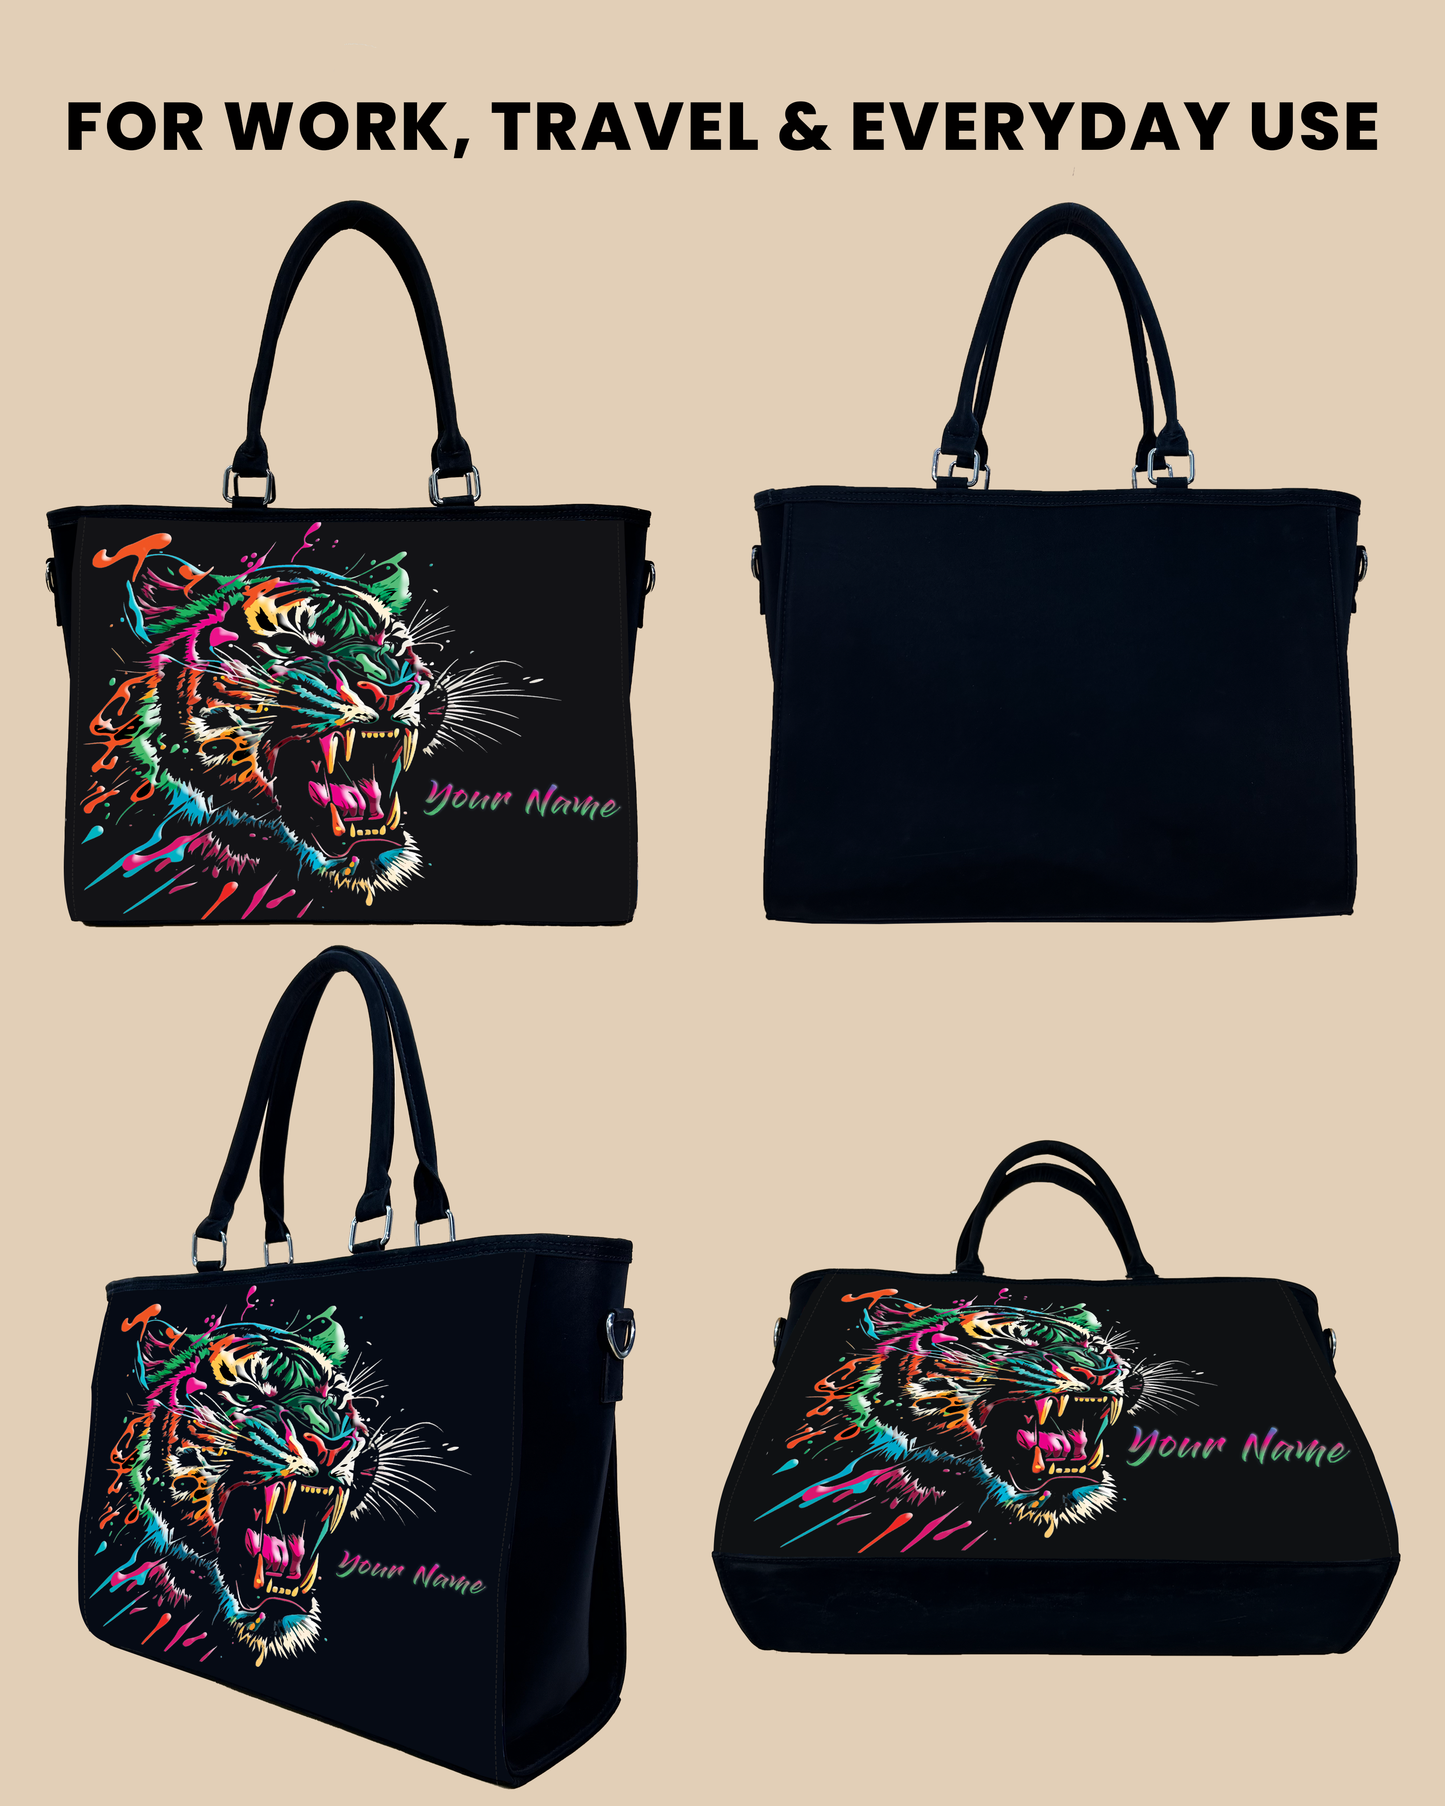 Colorful Roaring Bangal Tiger Oversized Tote